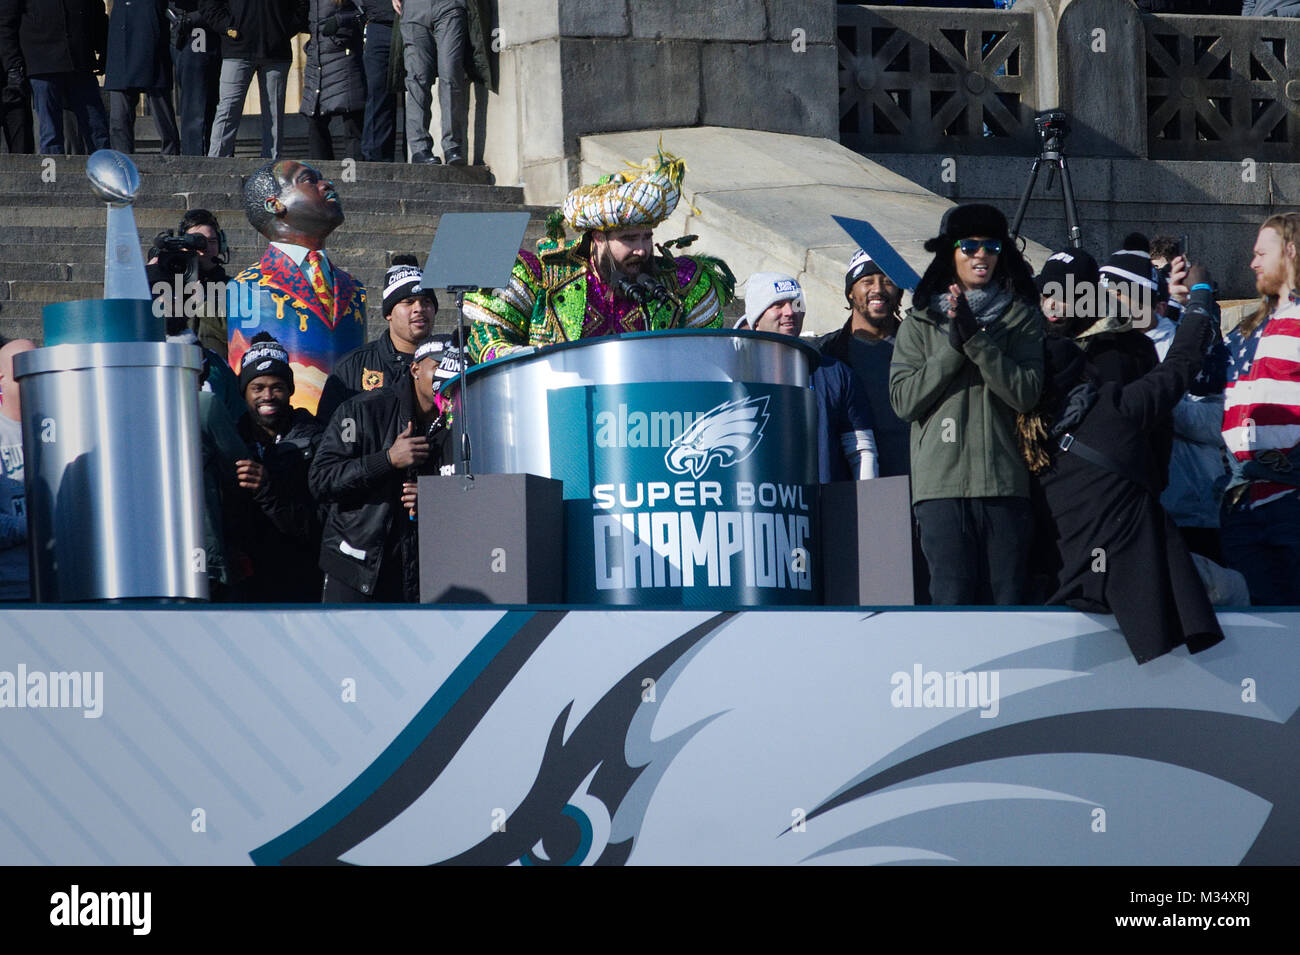 Eagles parade 2018 live updates: Highlights from Philadelphia's